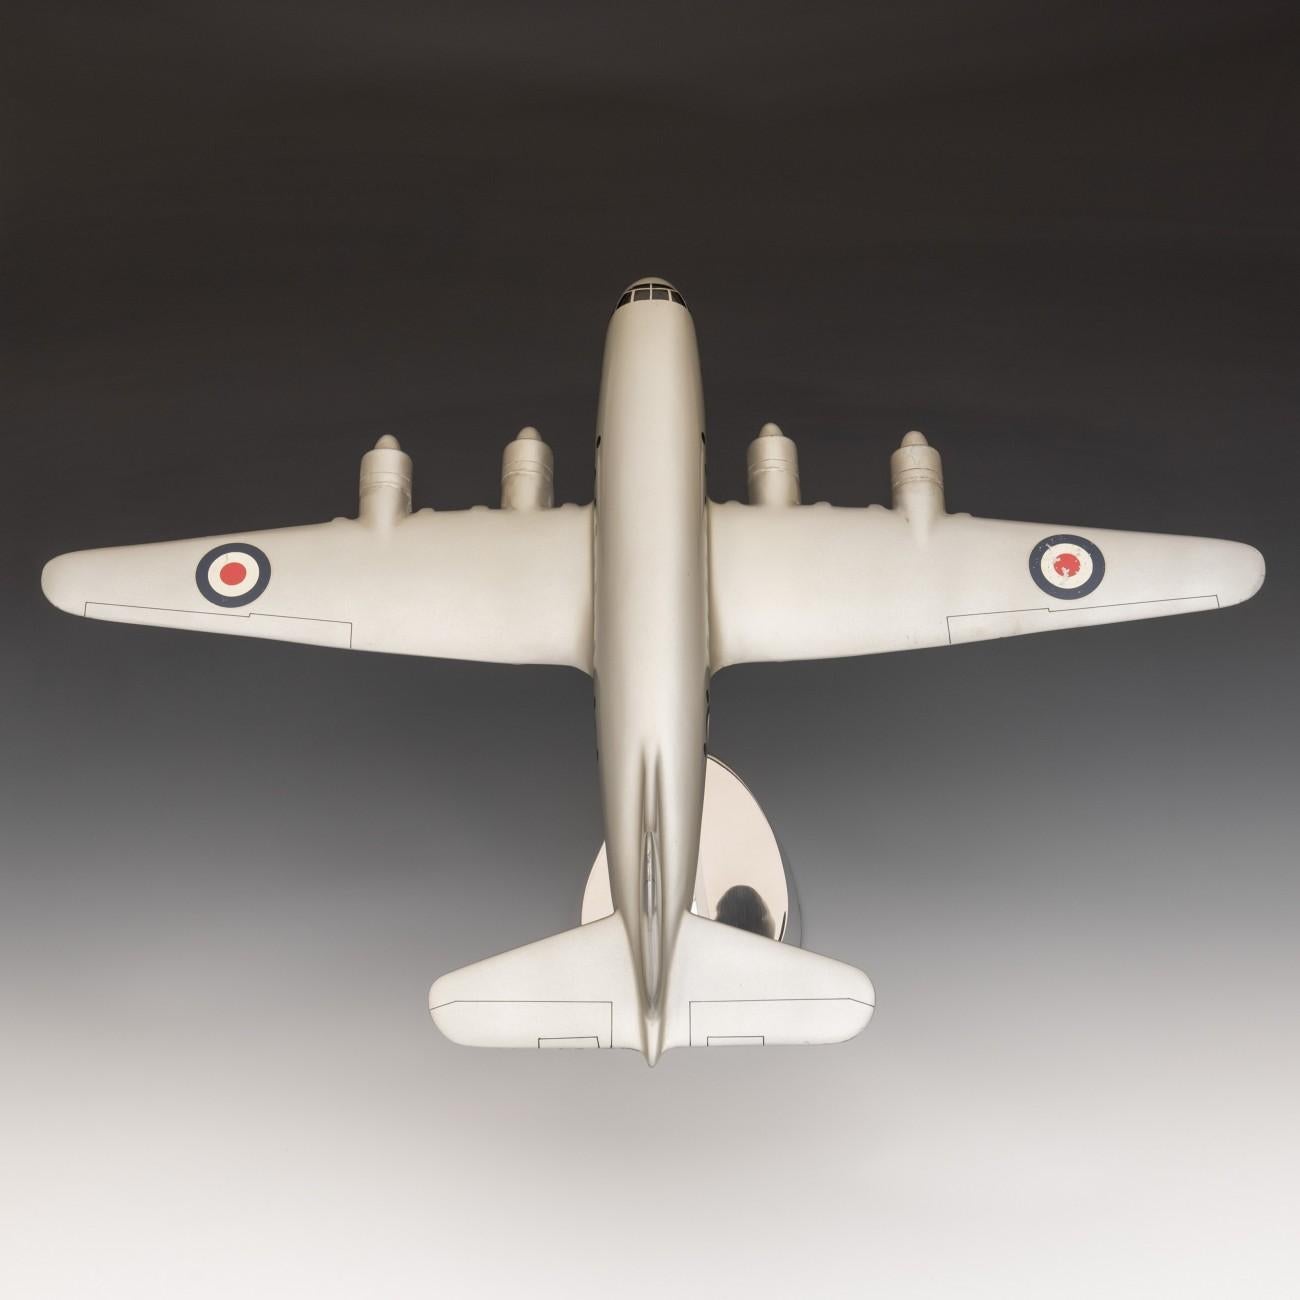 A splendid enamel painted cast aluminum model of a Handley Page Hastings on newly made polished aluminum stand. This model was originally made for the Air Ministry at the end of the 1940s when the Hastings was first introduced.

Dimensions: 52